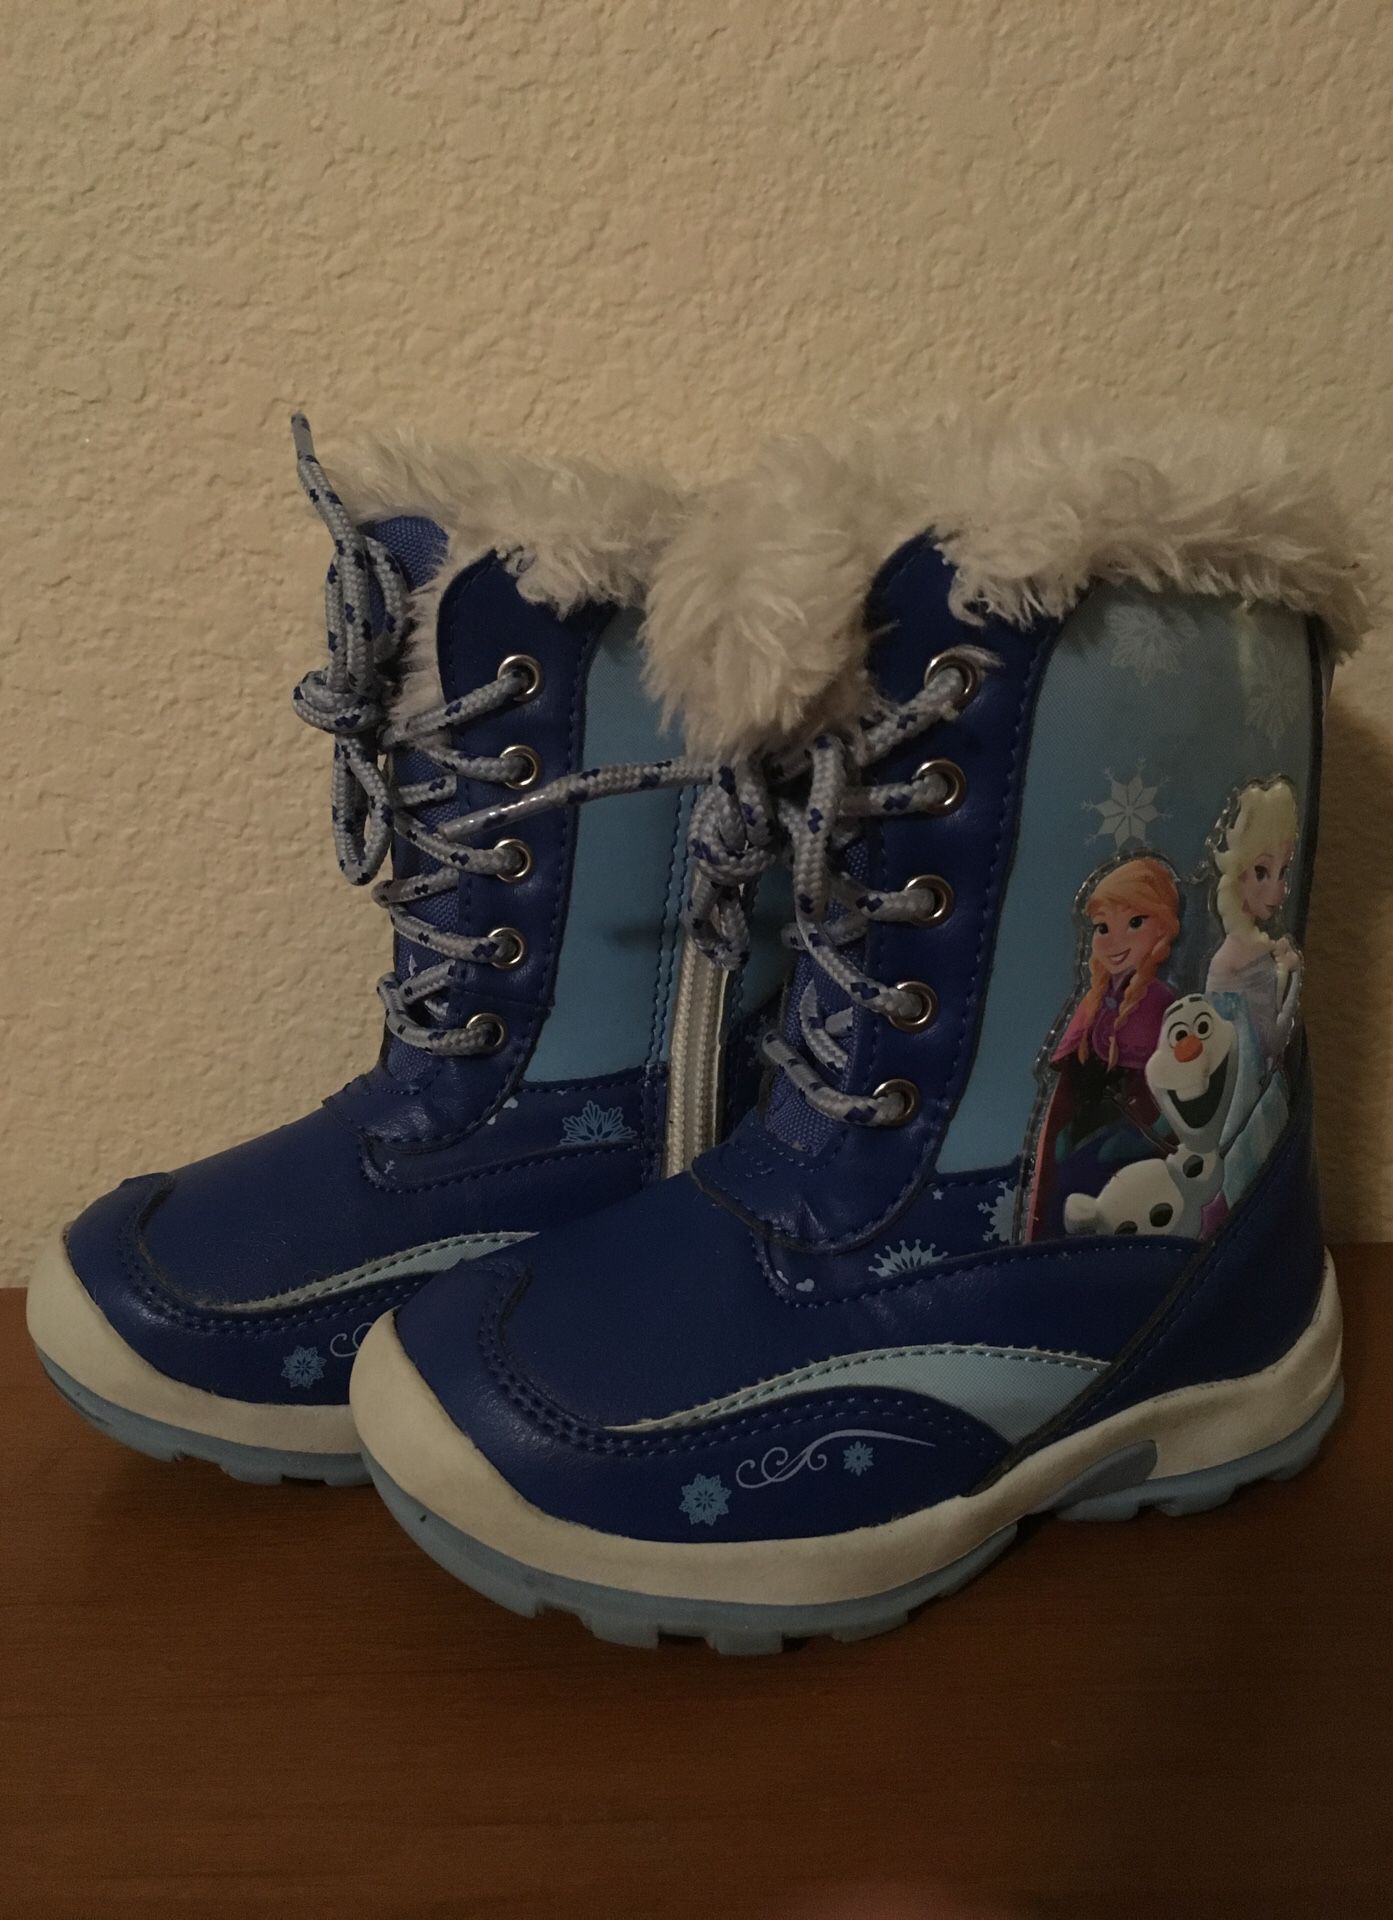 Toddler snow boots